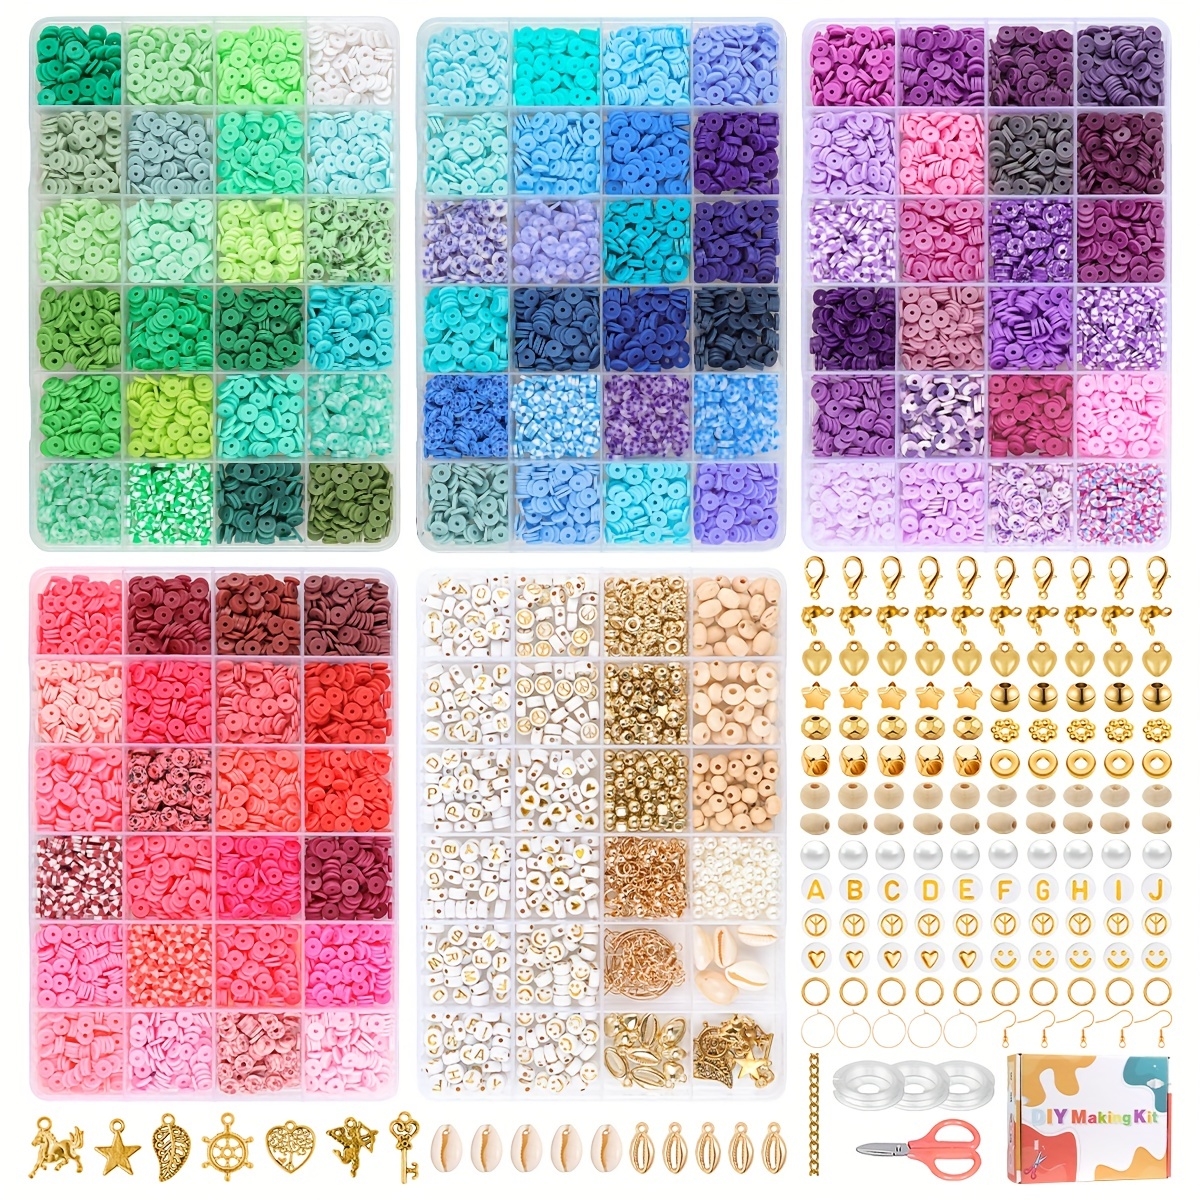 Waist Bead Spinner and Beads Kit with 4 Bowls, 2 Needles and 1000Pcs Beads